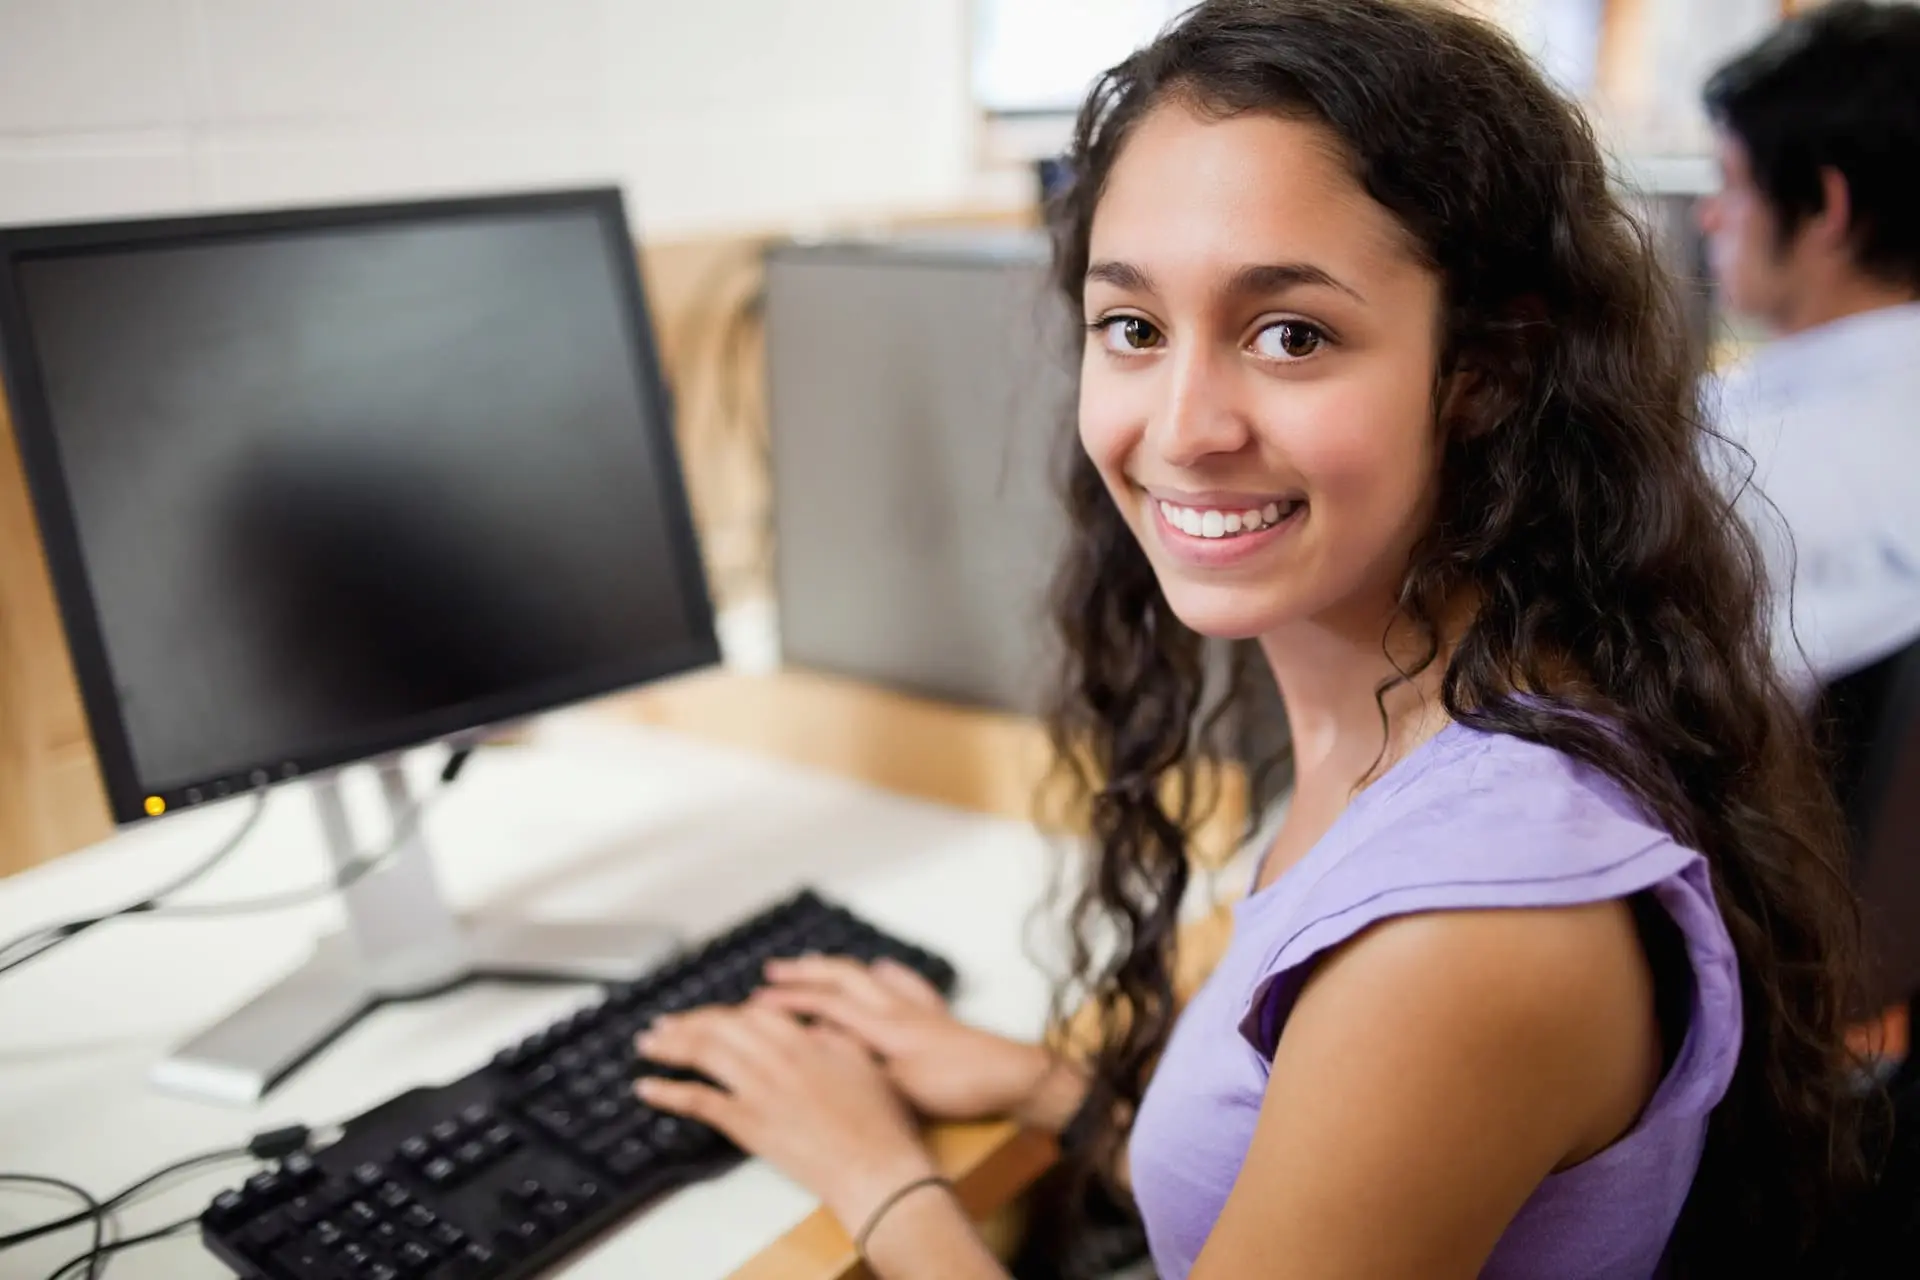 A young female student smiling, sitting at a computer.